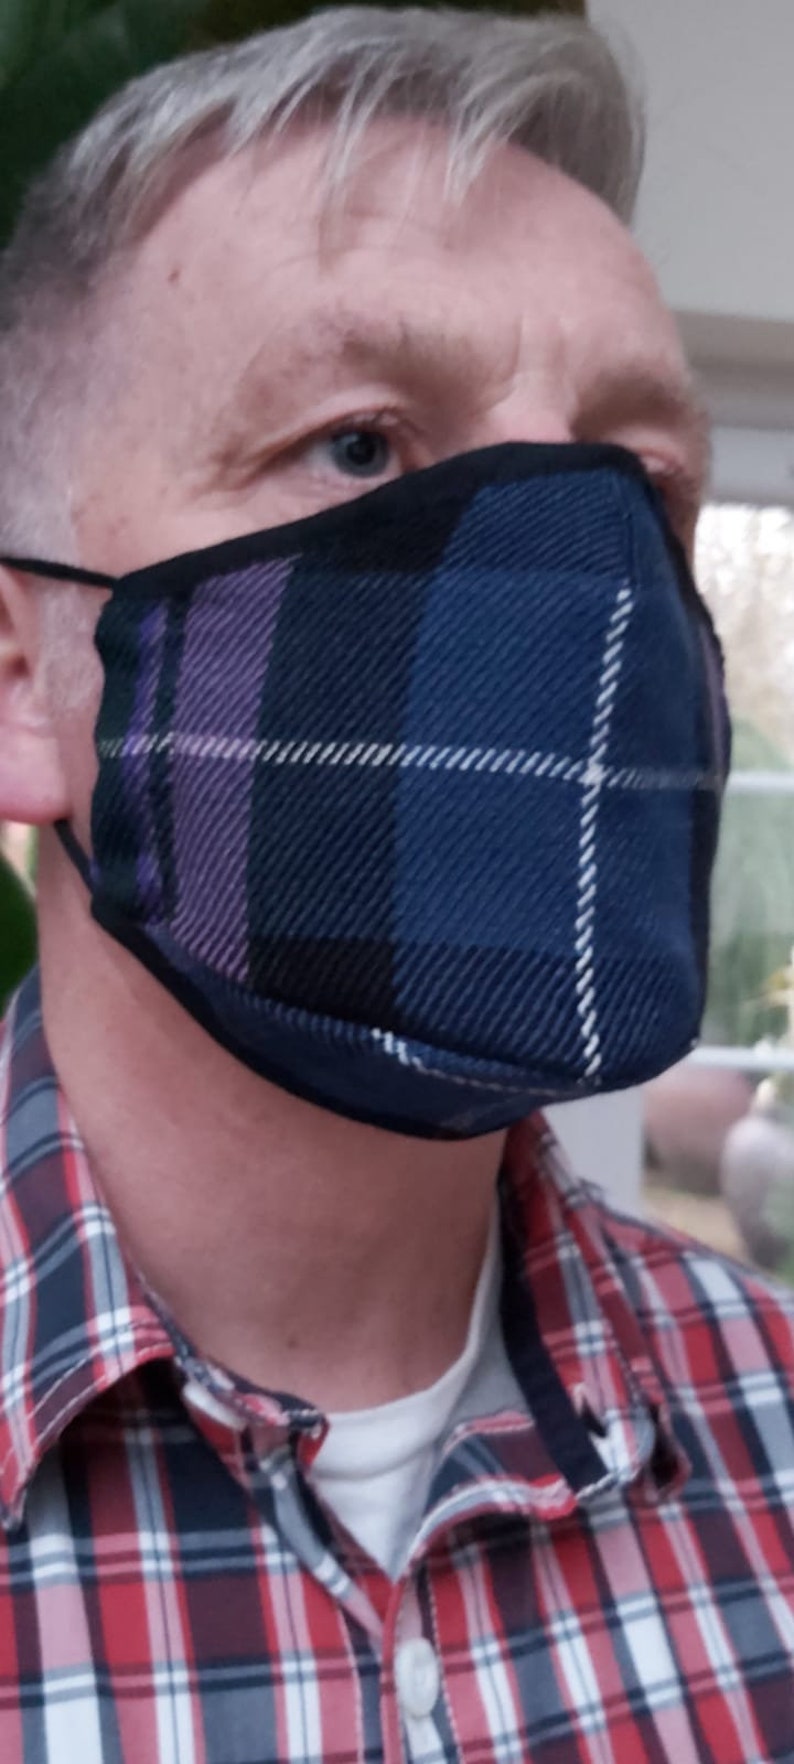 Pride of Scotland Tartan face mask with chin saddle in our Etsy